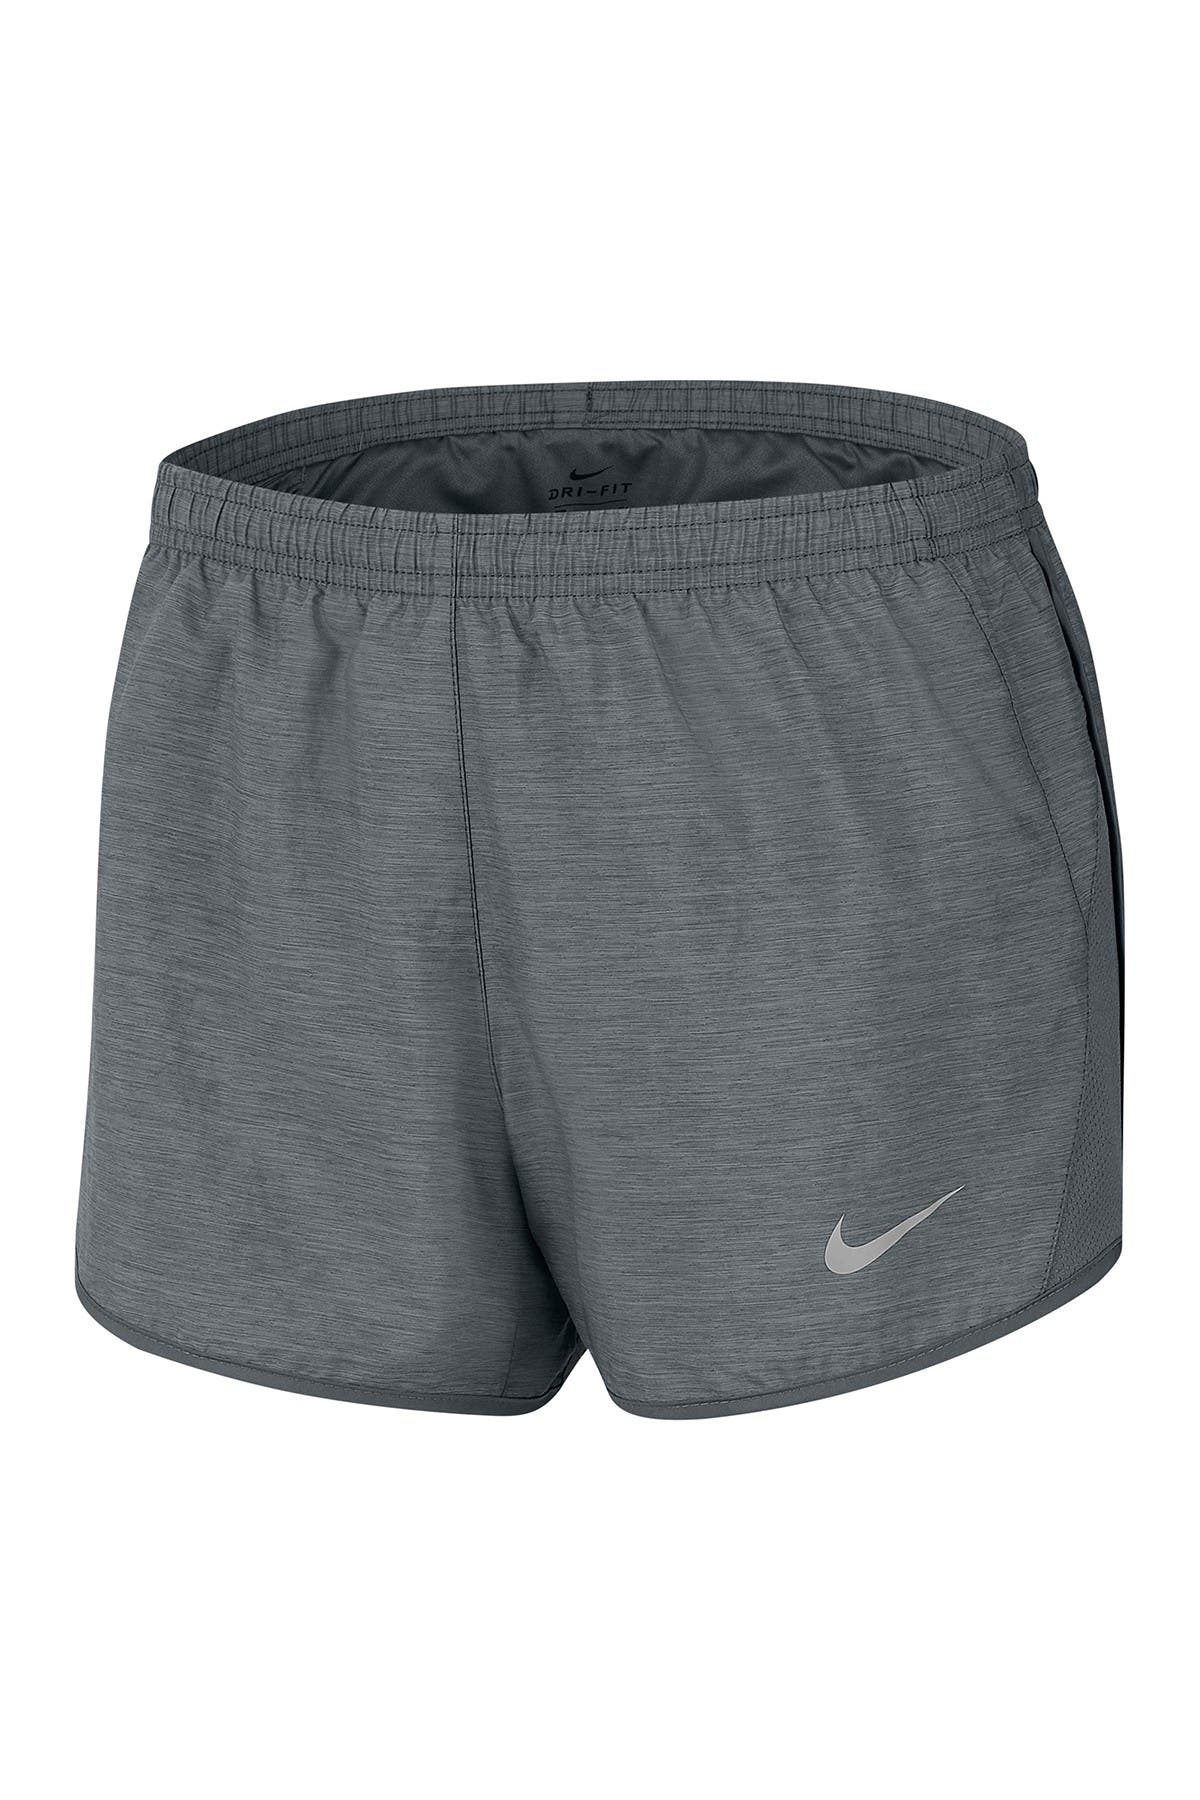 Nike 10k Dri-fit Running Shorts In Smkgry/wlfgry